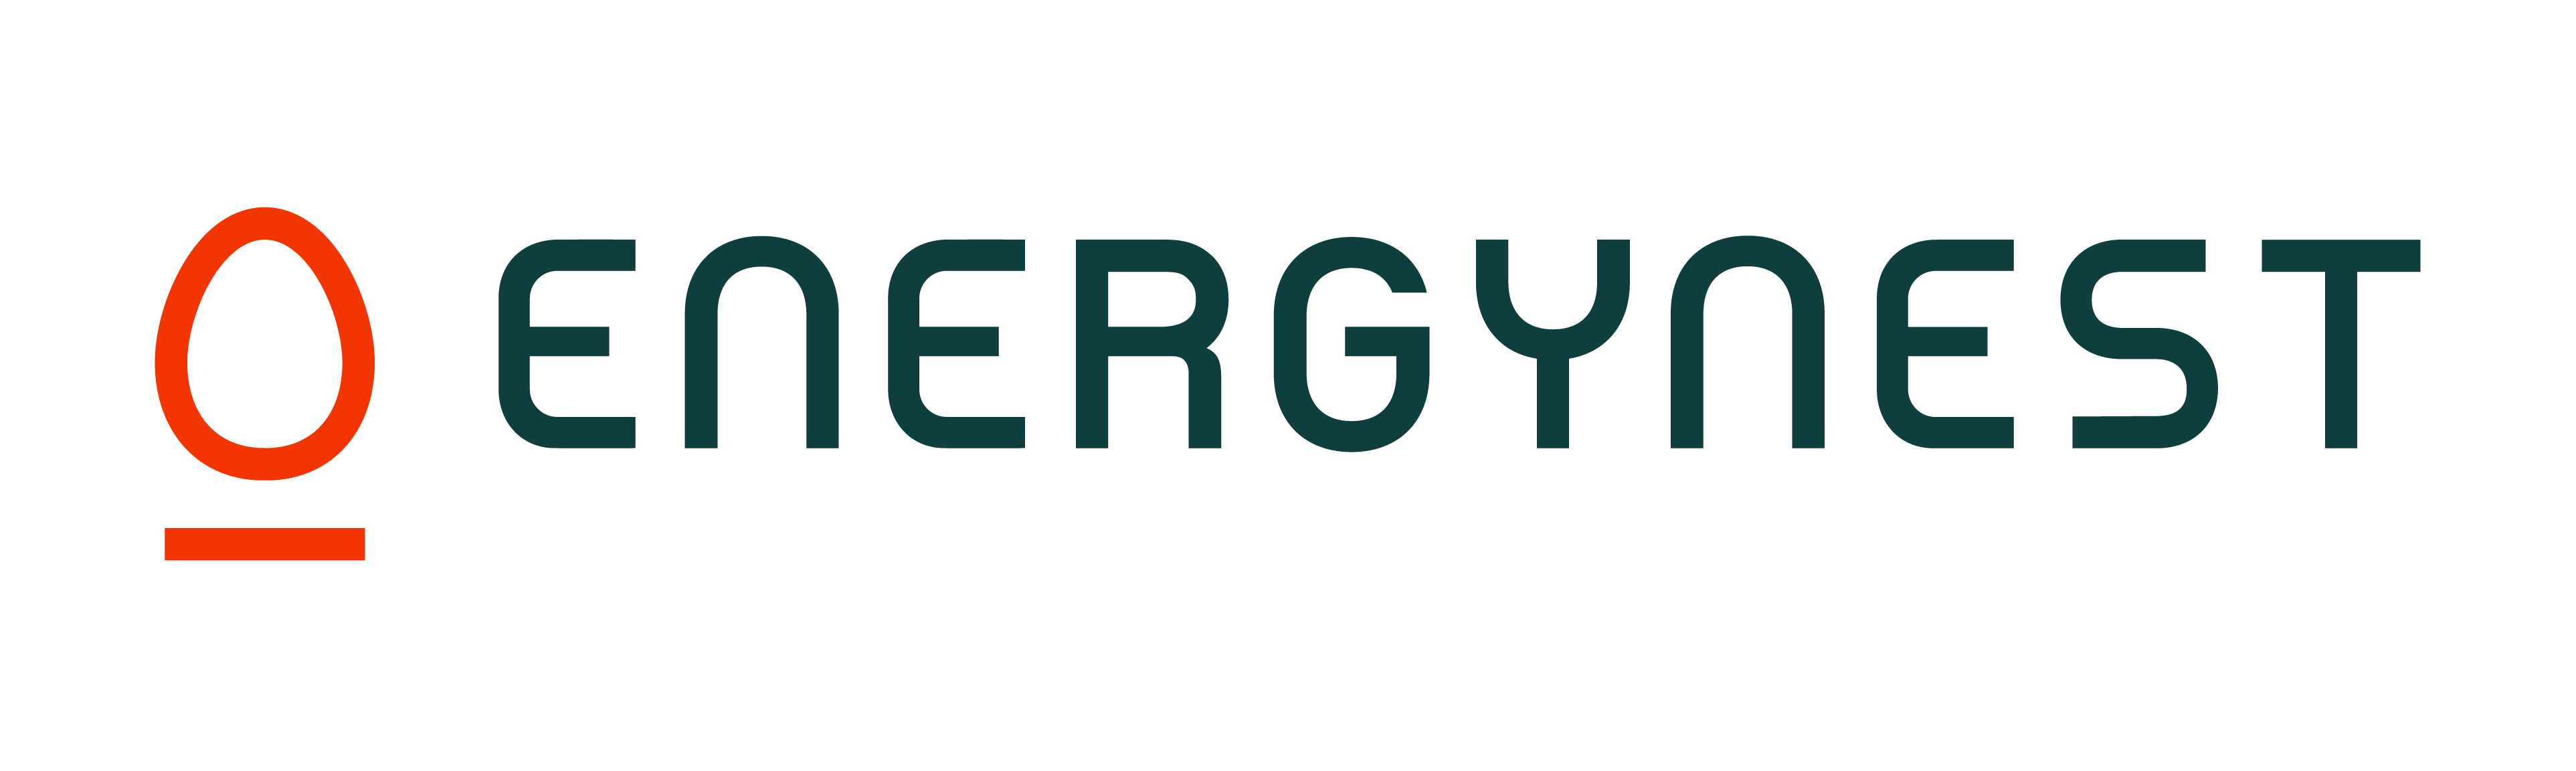 Energynest_Logo_Landscape_Primary-Red_Green_AW.png